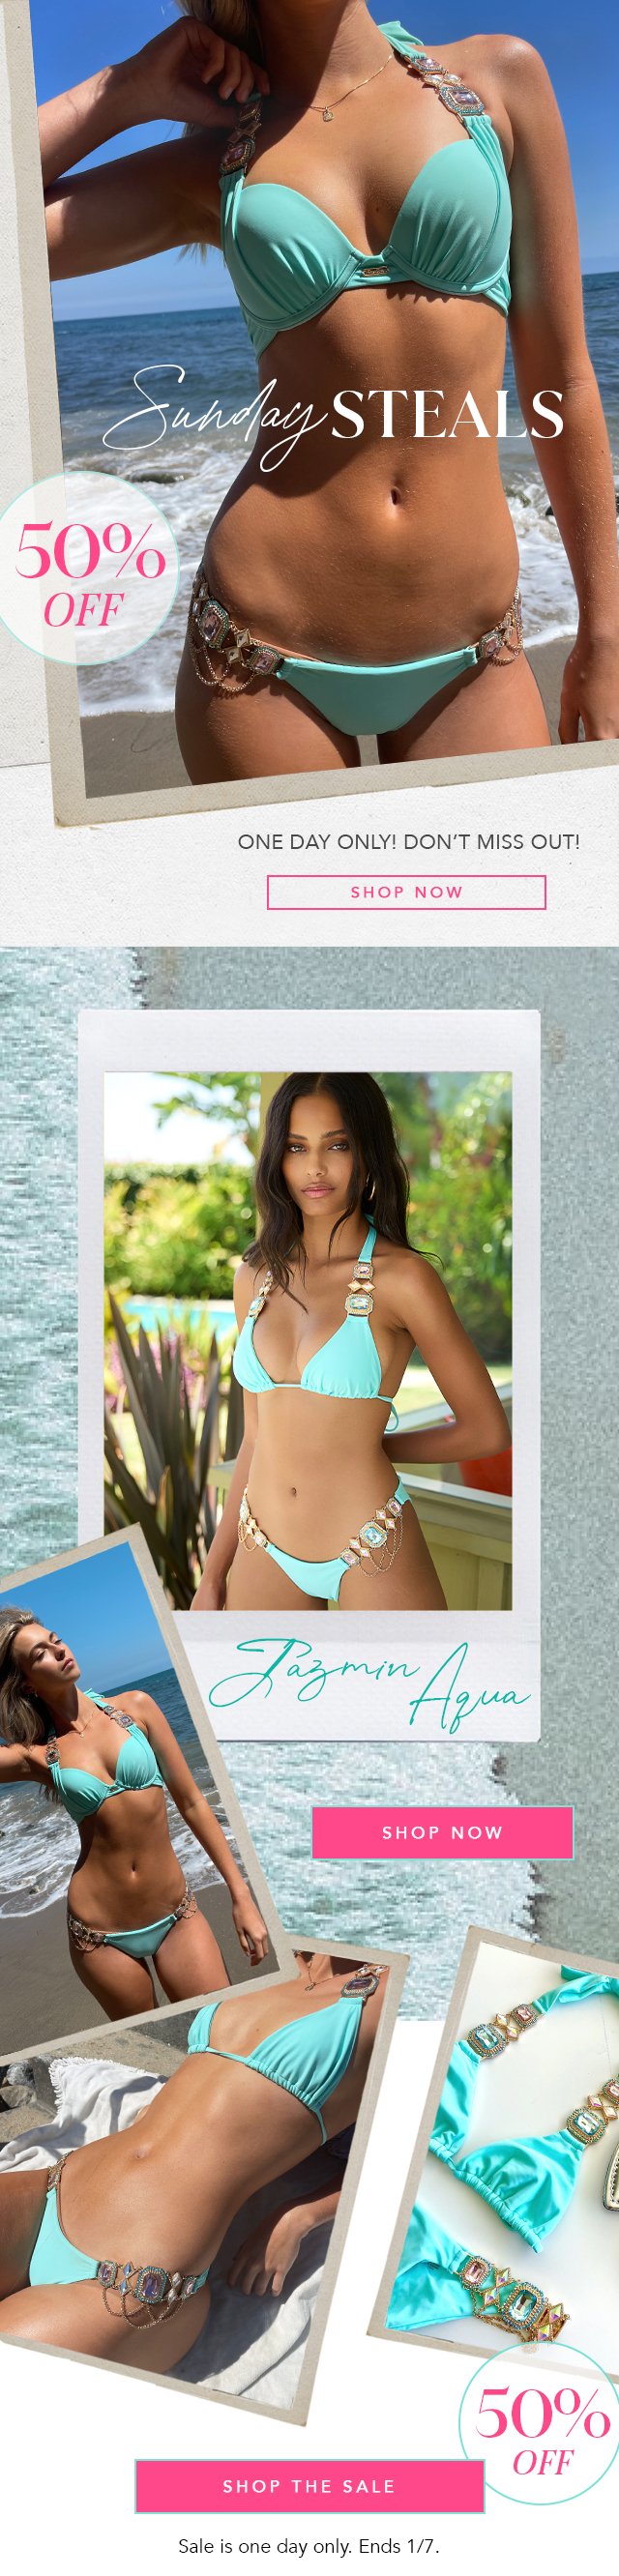 Sunday Steals! Jazmin Aqua 50% Off! One Day Only! Don't Miss Out! Ends 1/7. Shop Now